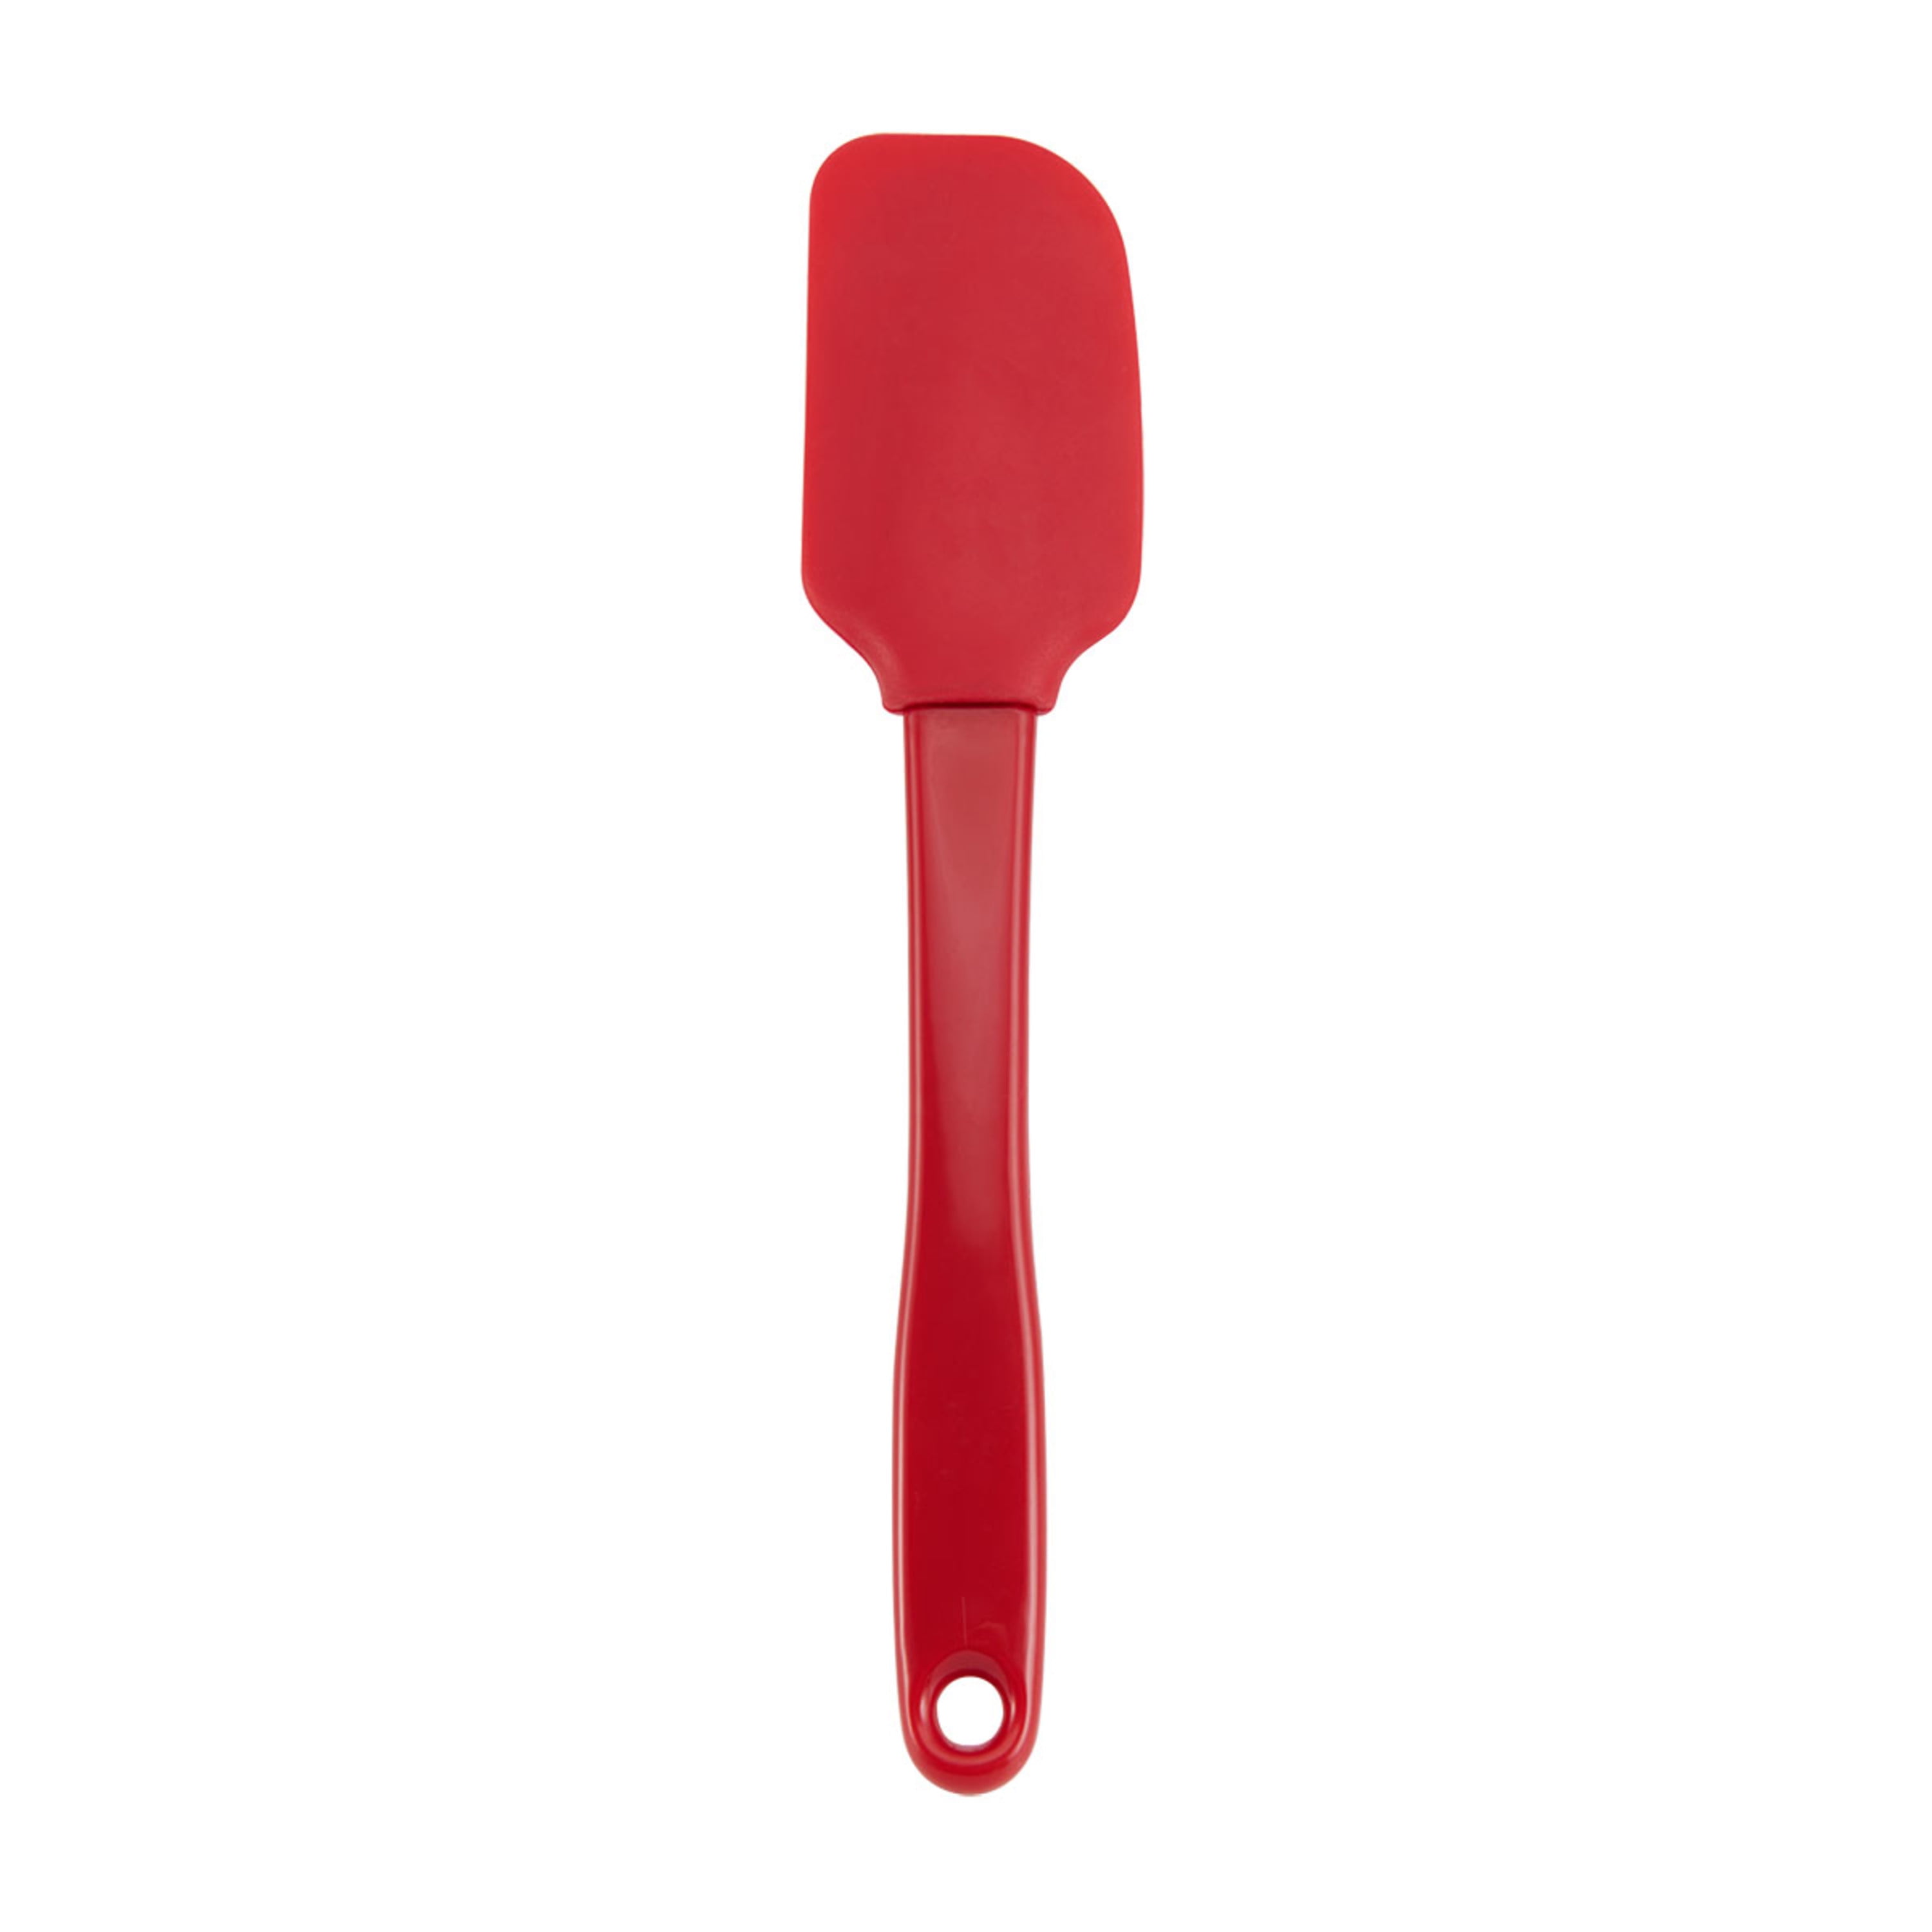 I Tried the GIR Silicone Ladle. Here's My Honest Review